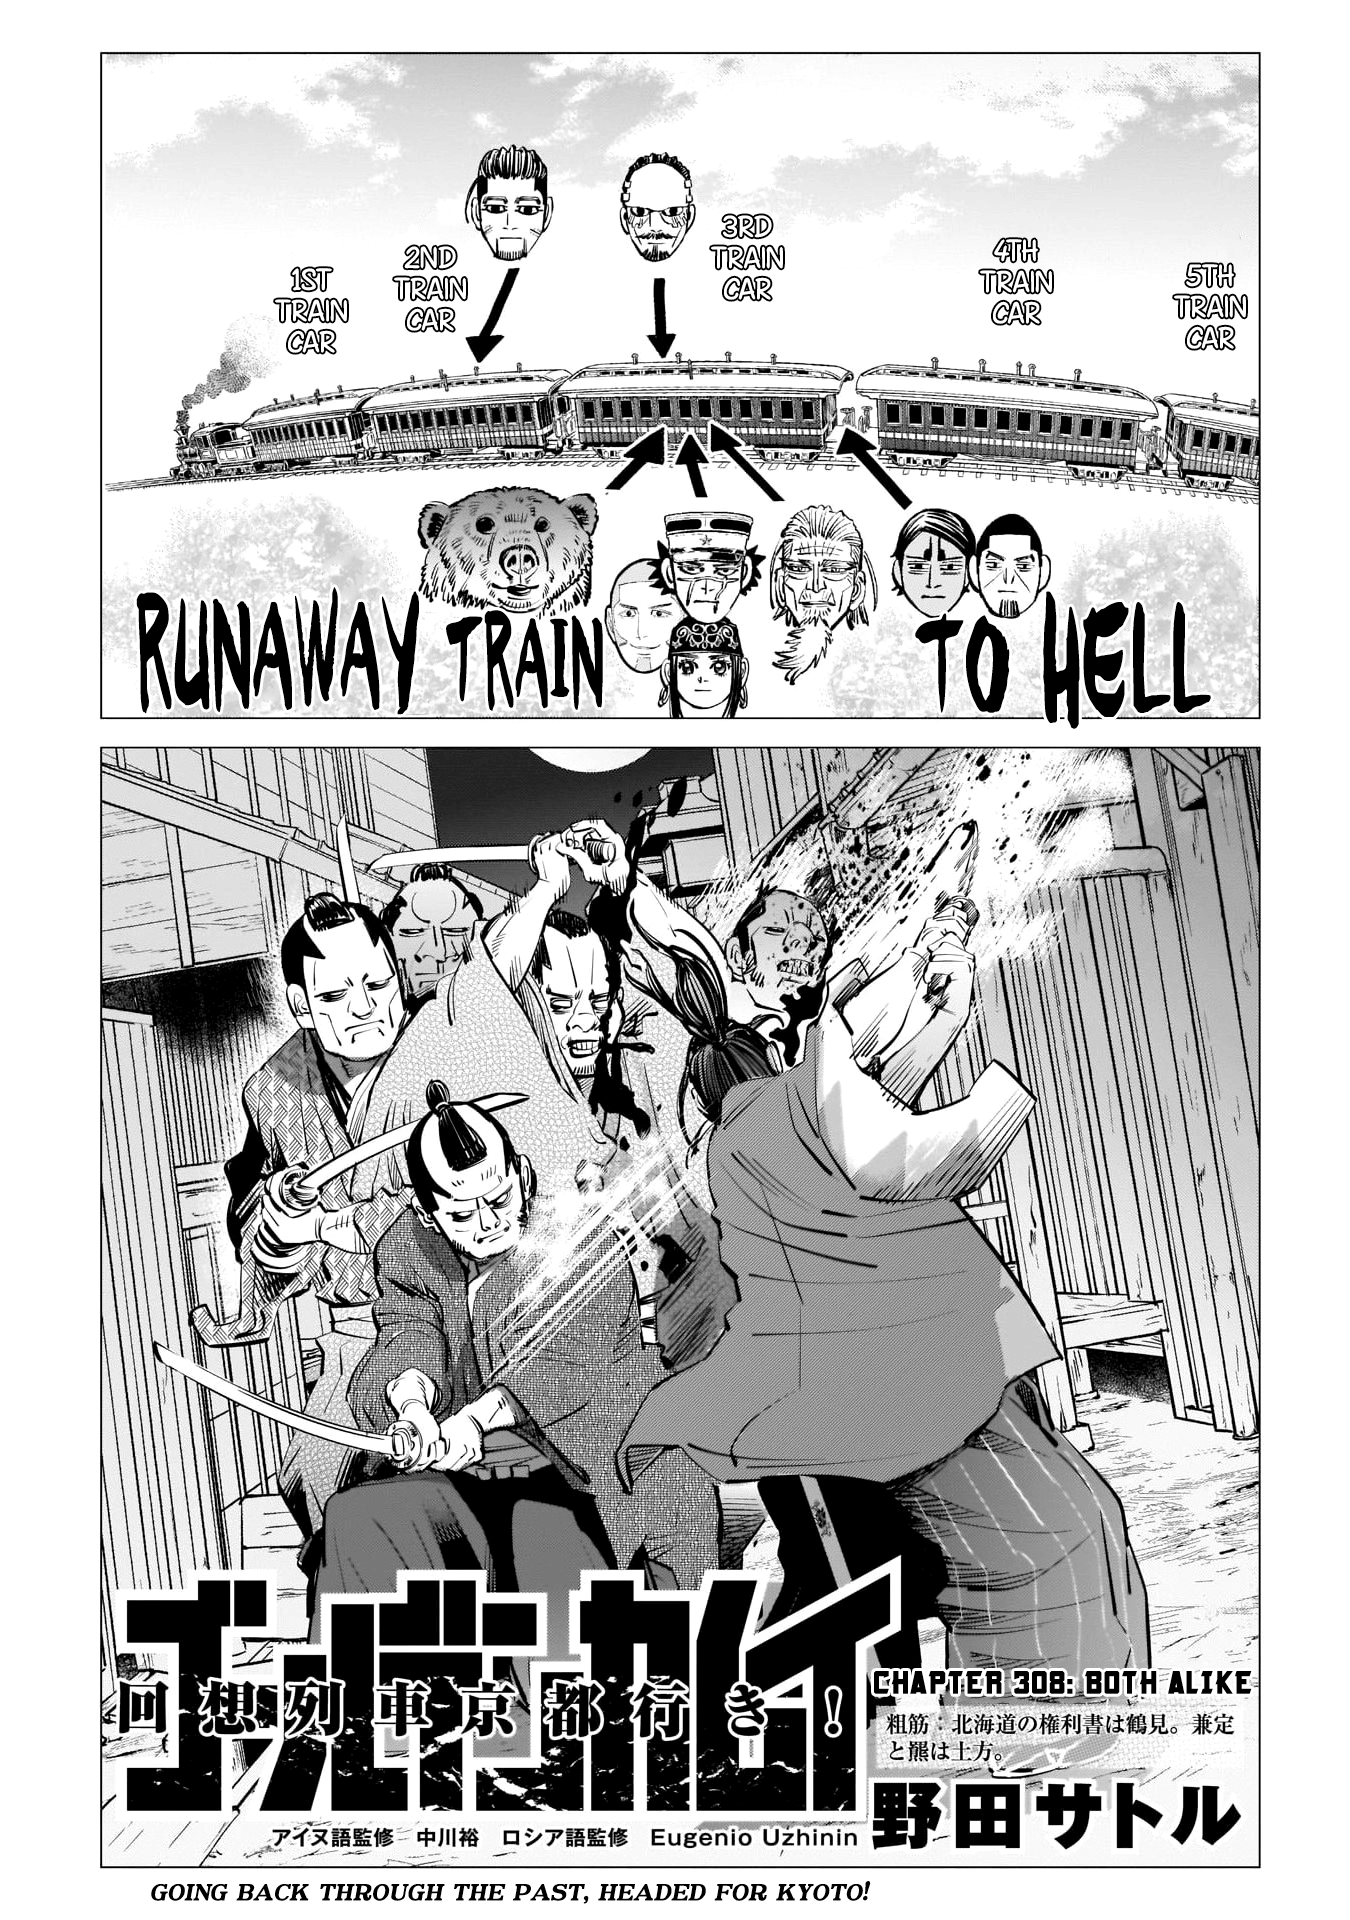 Golden Kamui Chapter 308: Both Alike - Picture 1